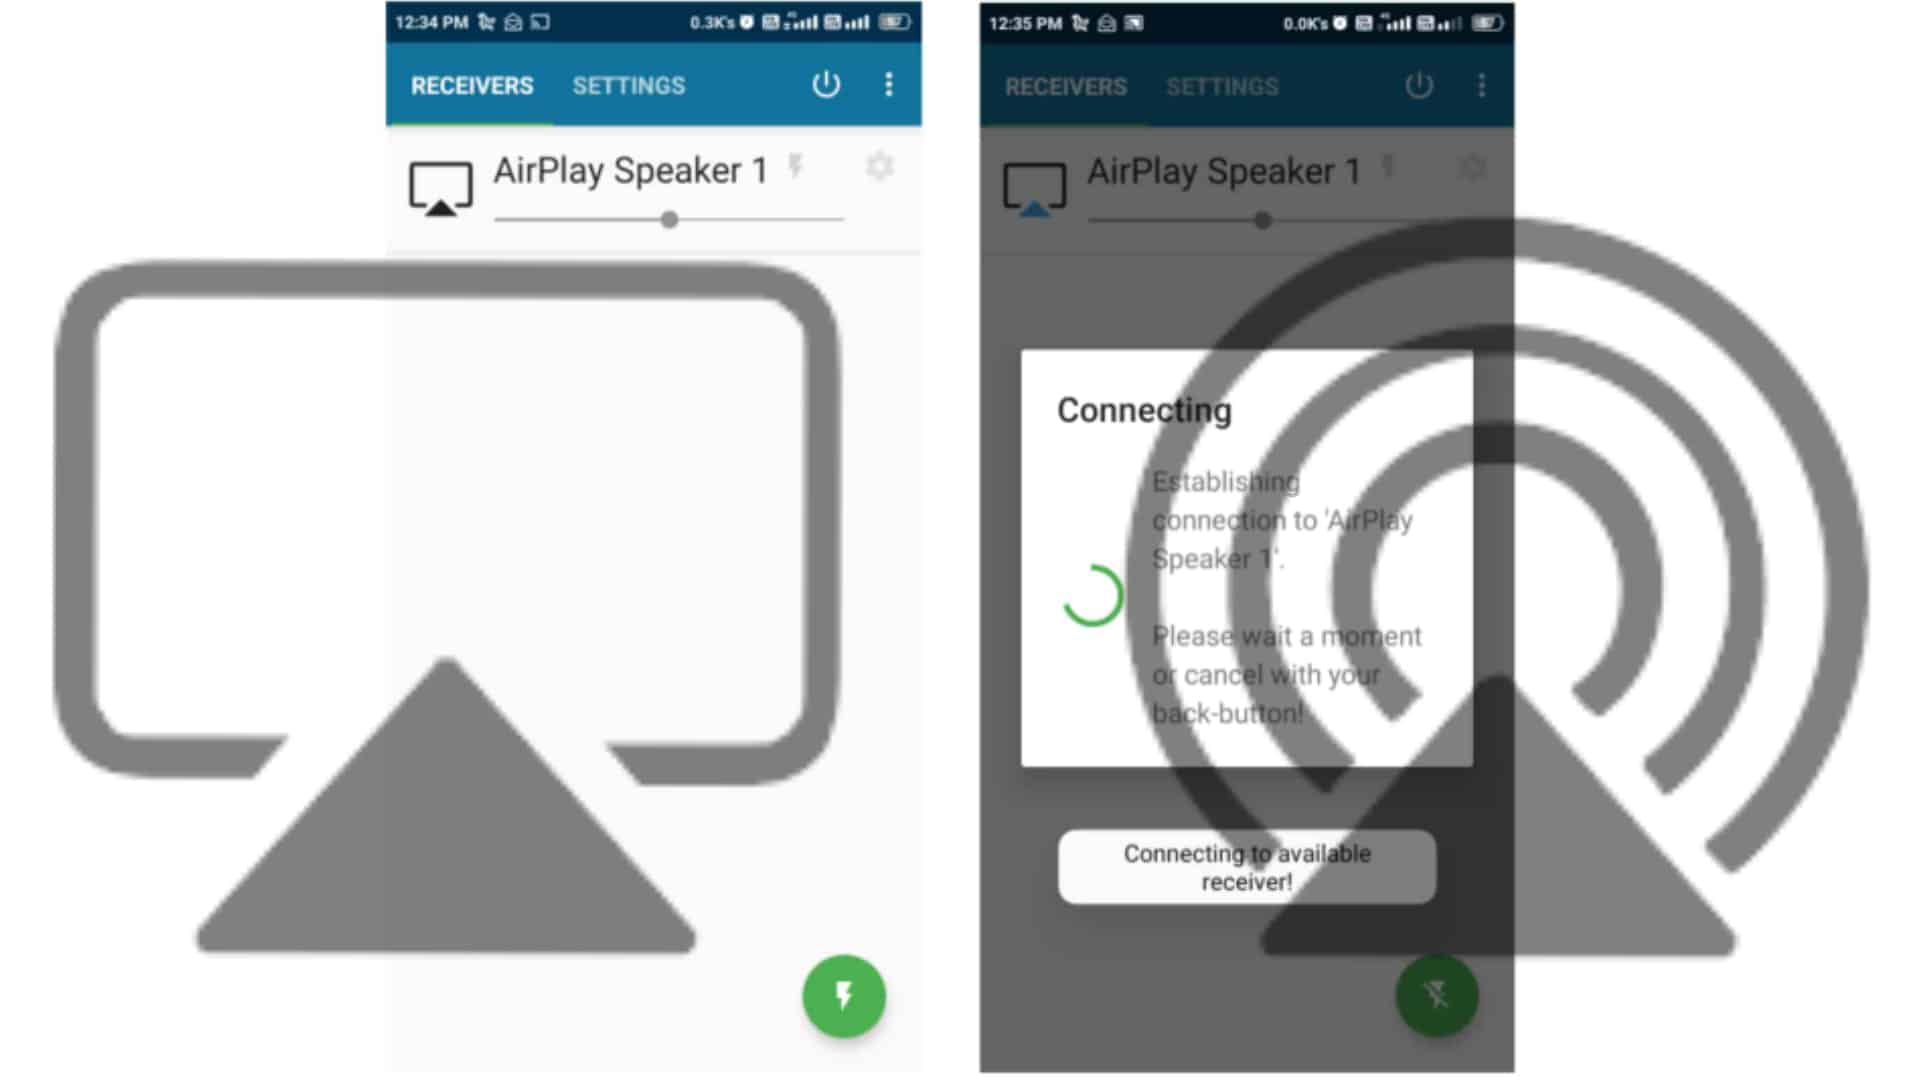 How to Share Music Using AirPlay from an Android Phone